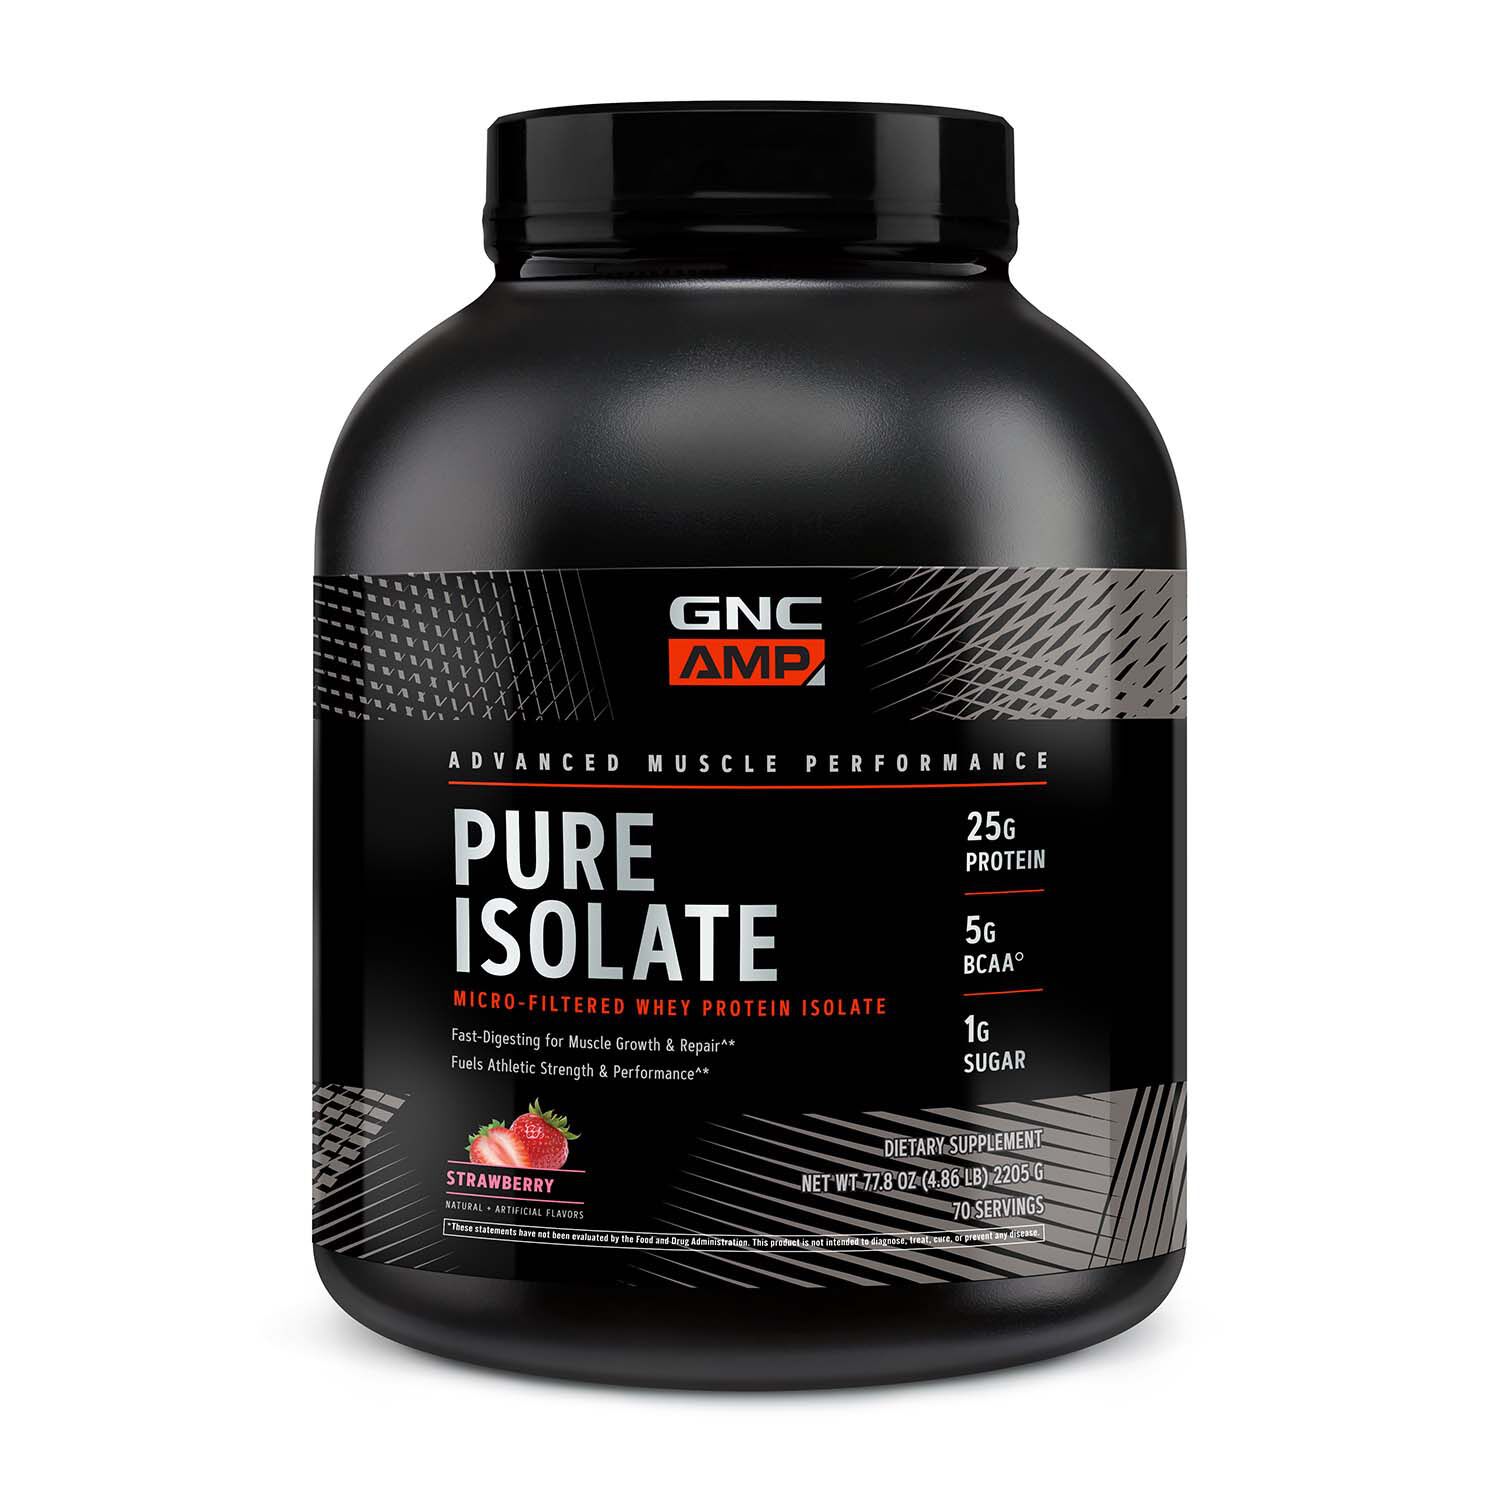 GNC AMP Pure Whey Isolate Protein Powder Strawberry